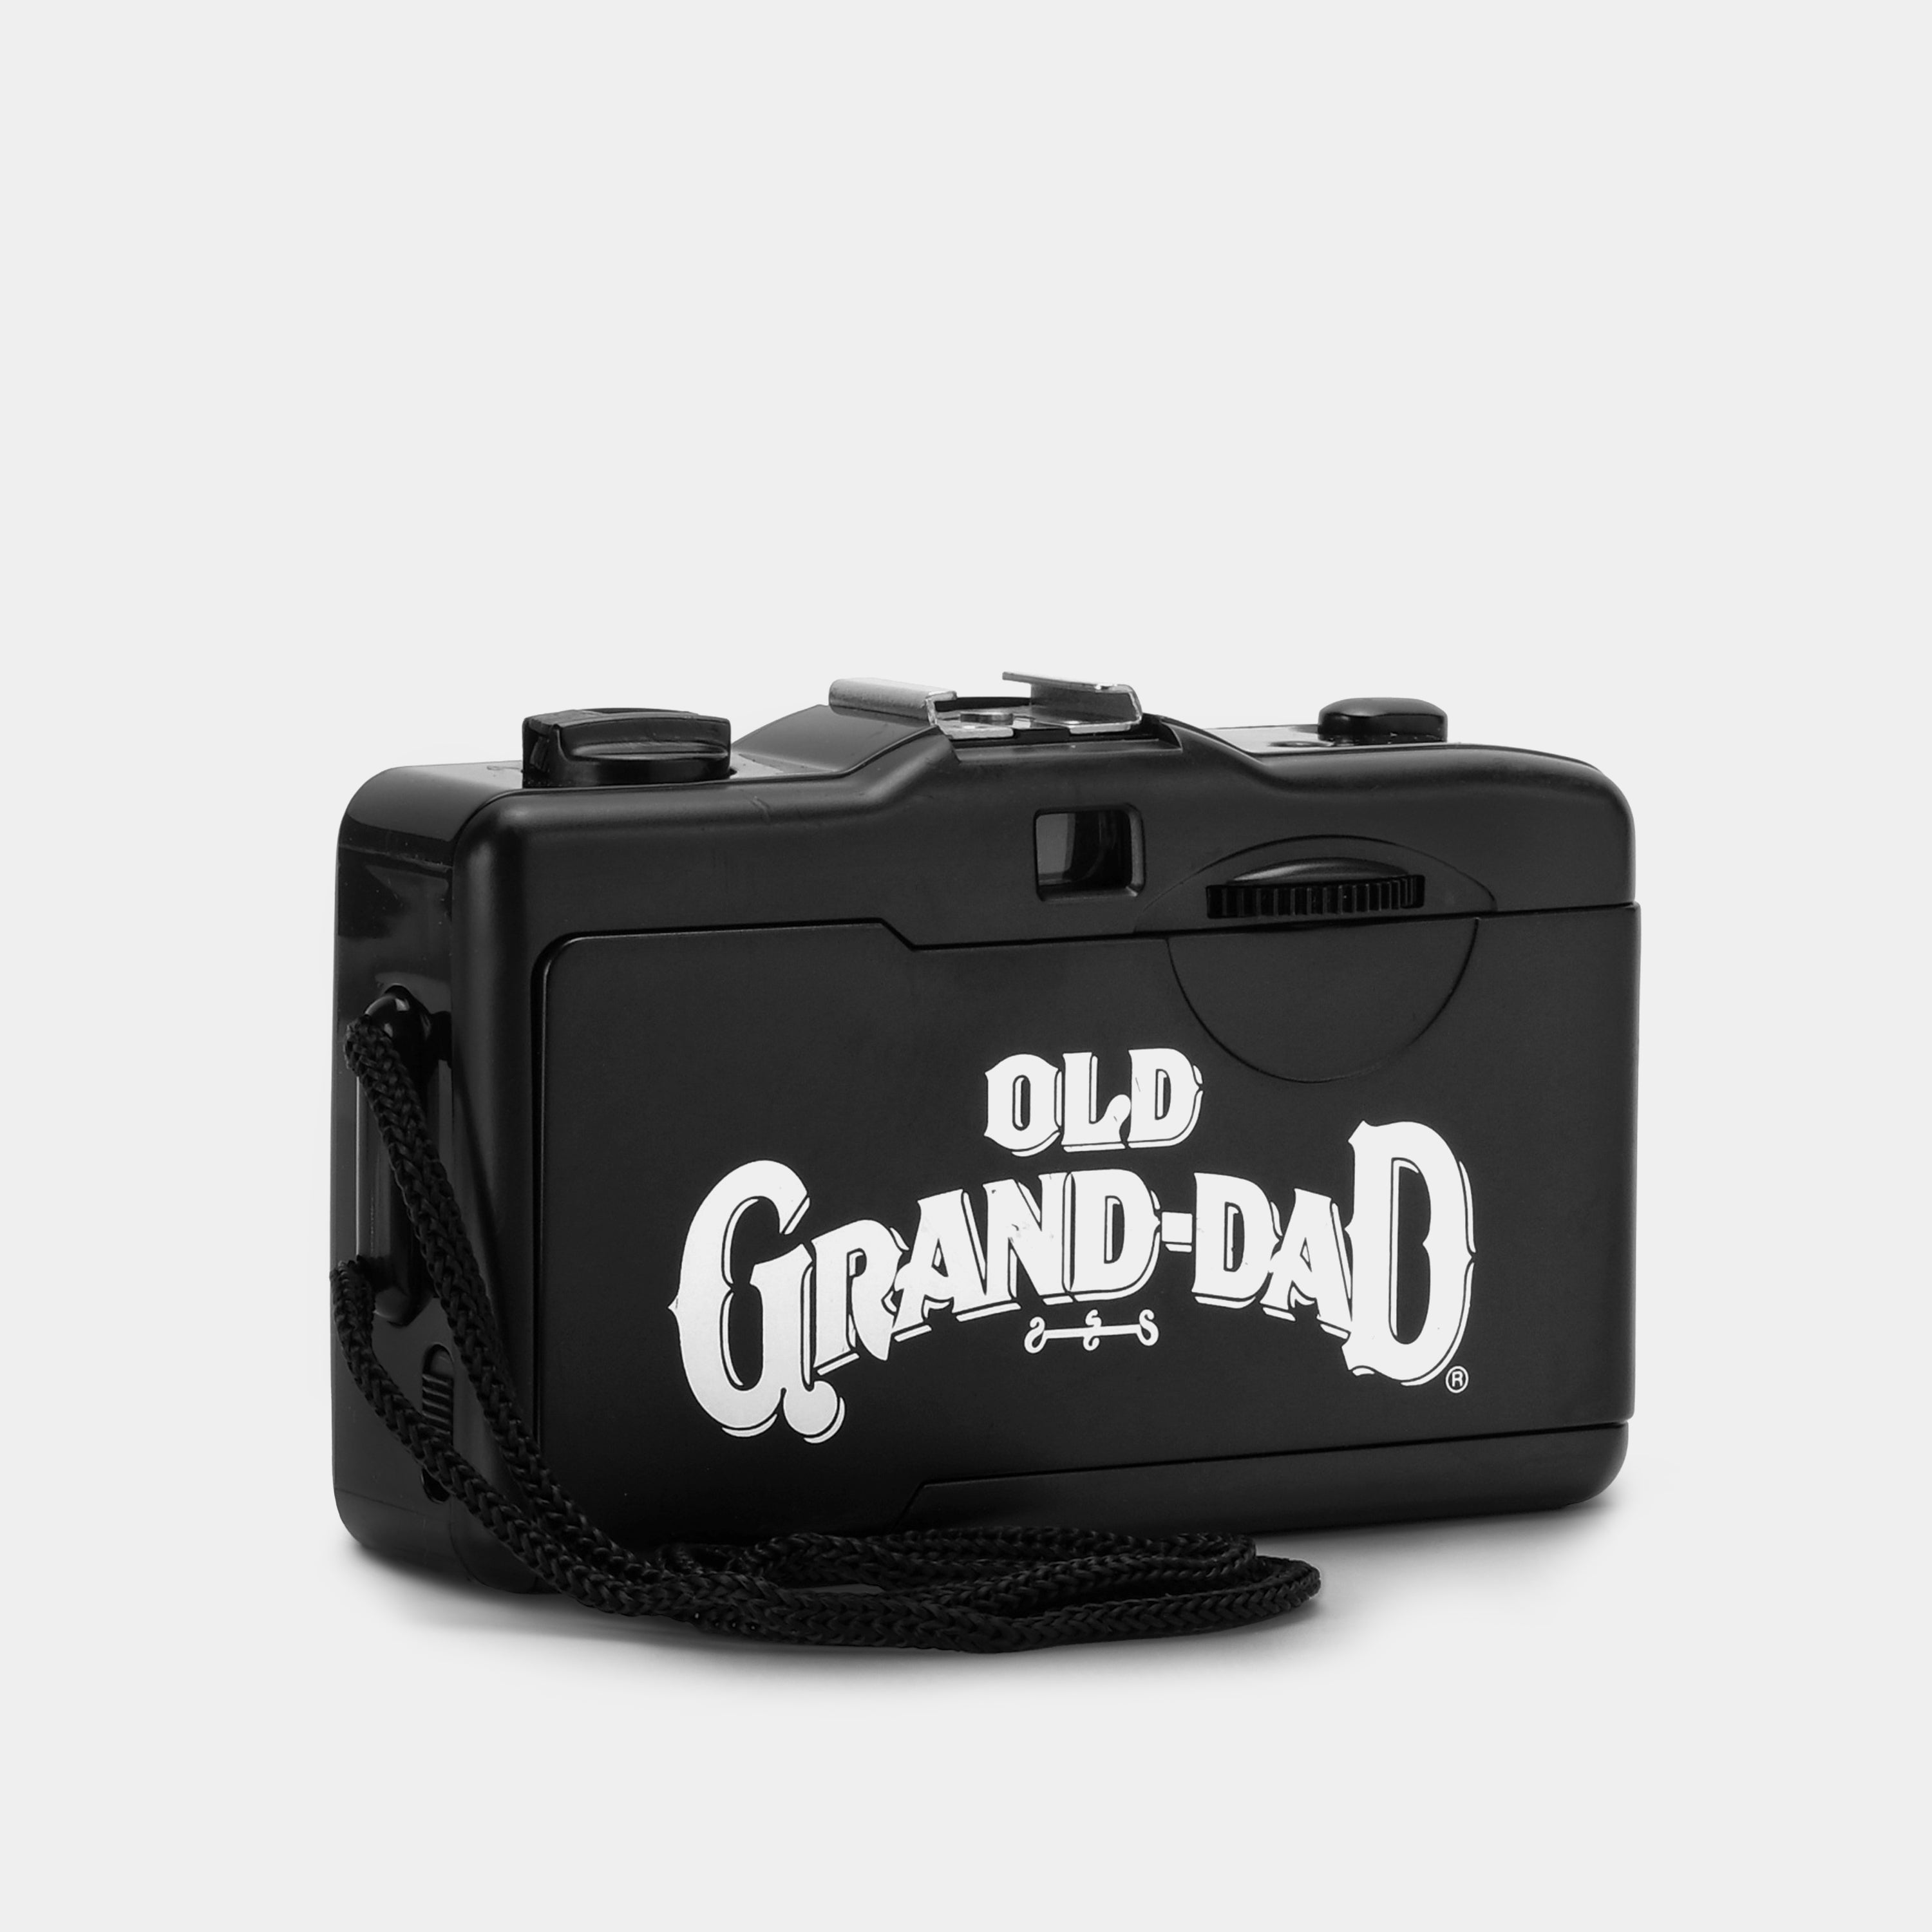 Old Grand-Dad 35mm Point and Shoot Film Camera